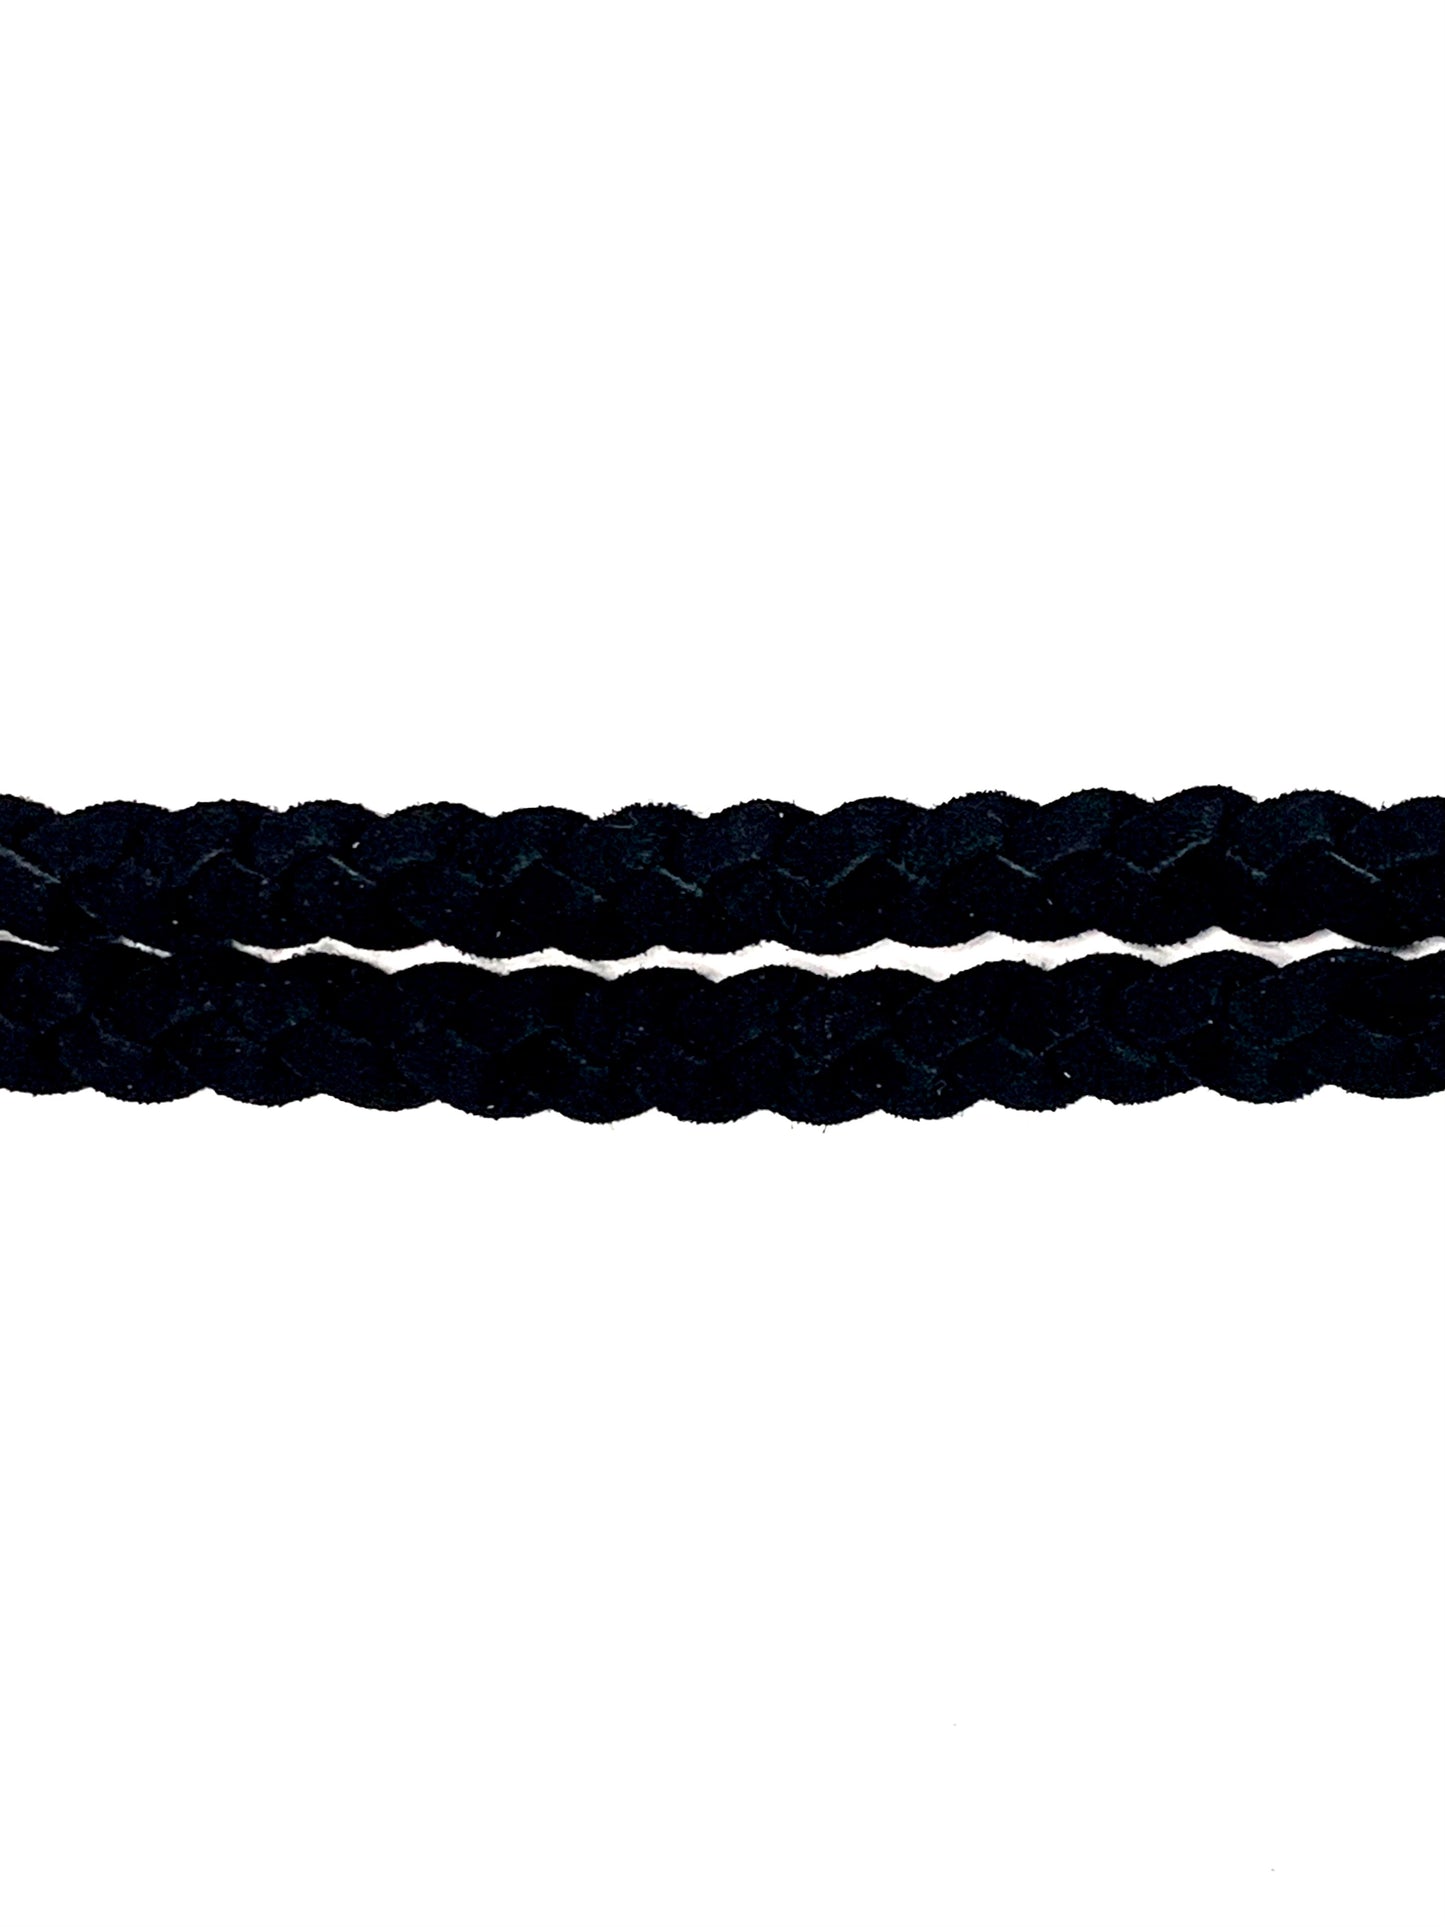 Double Braided Black Leather Hat Band